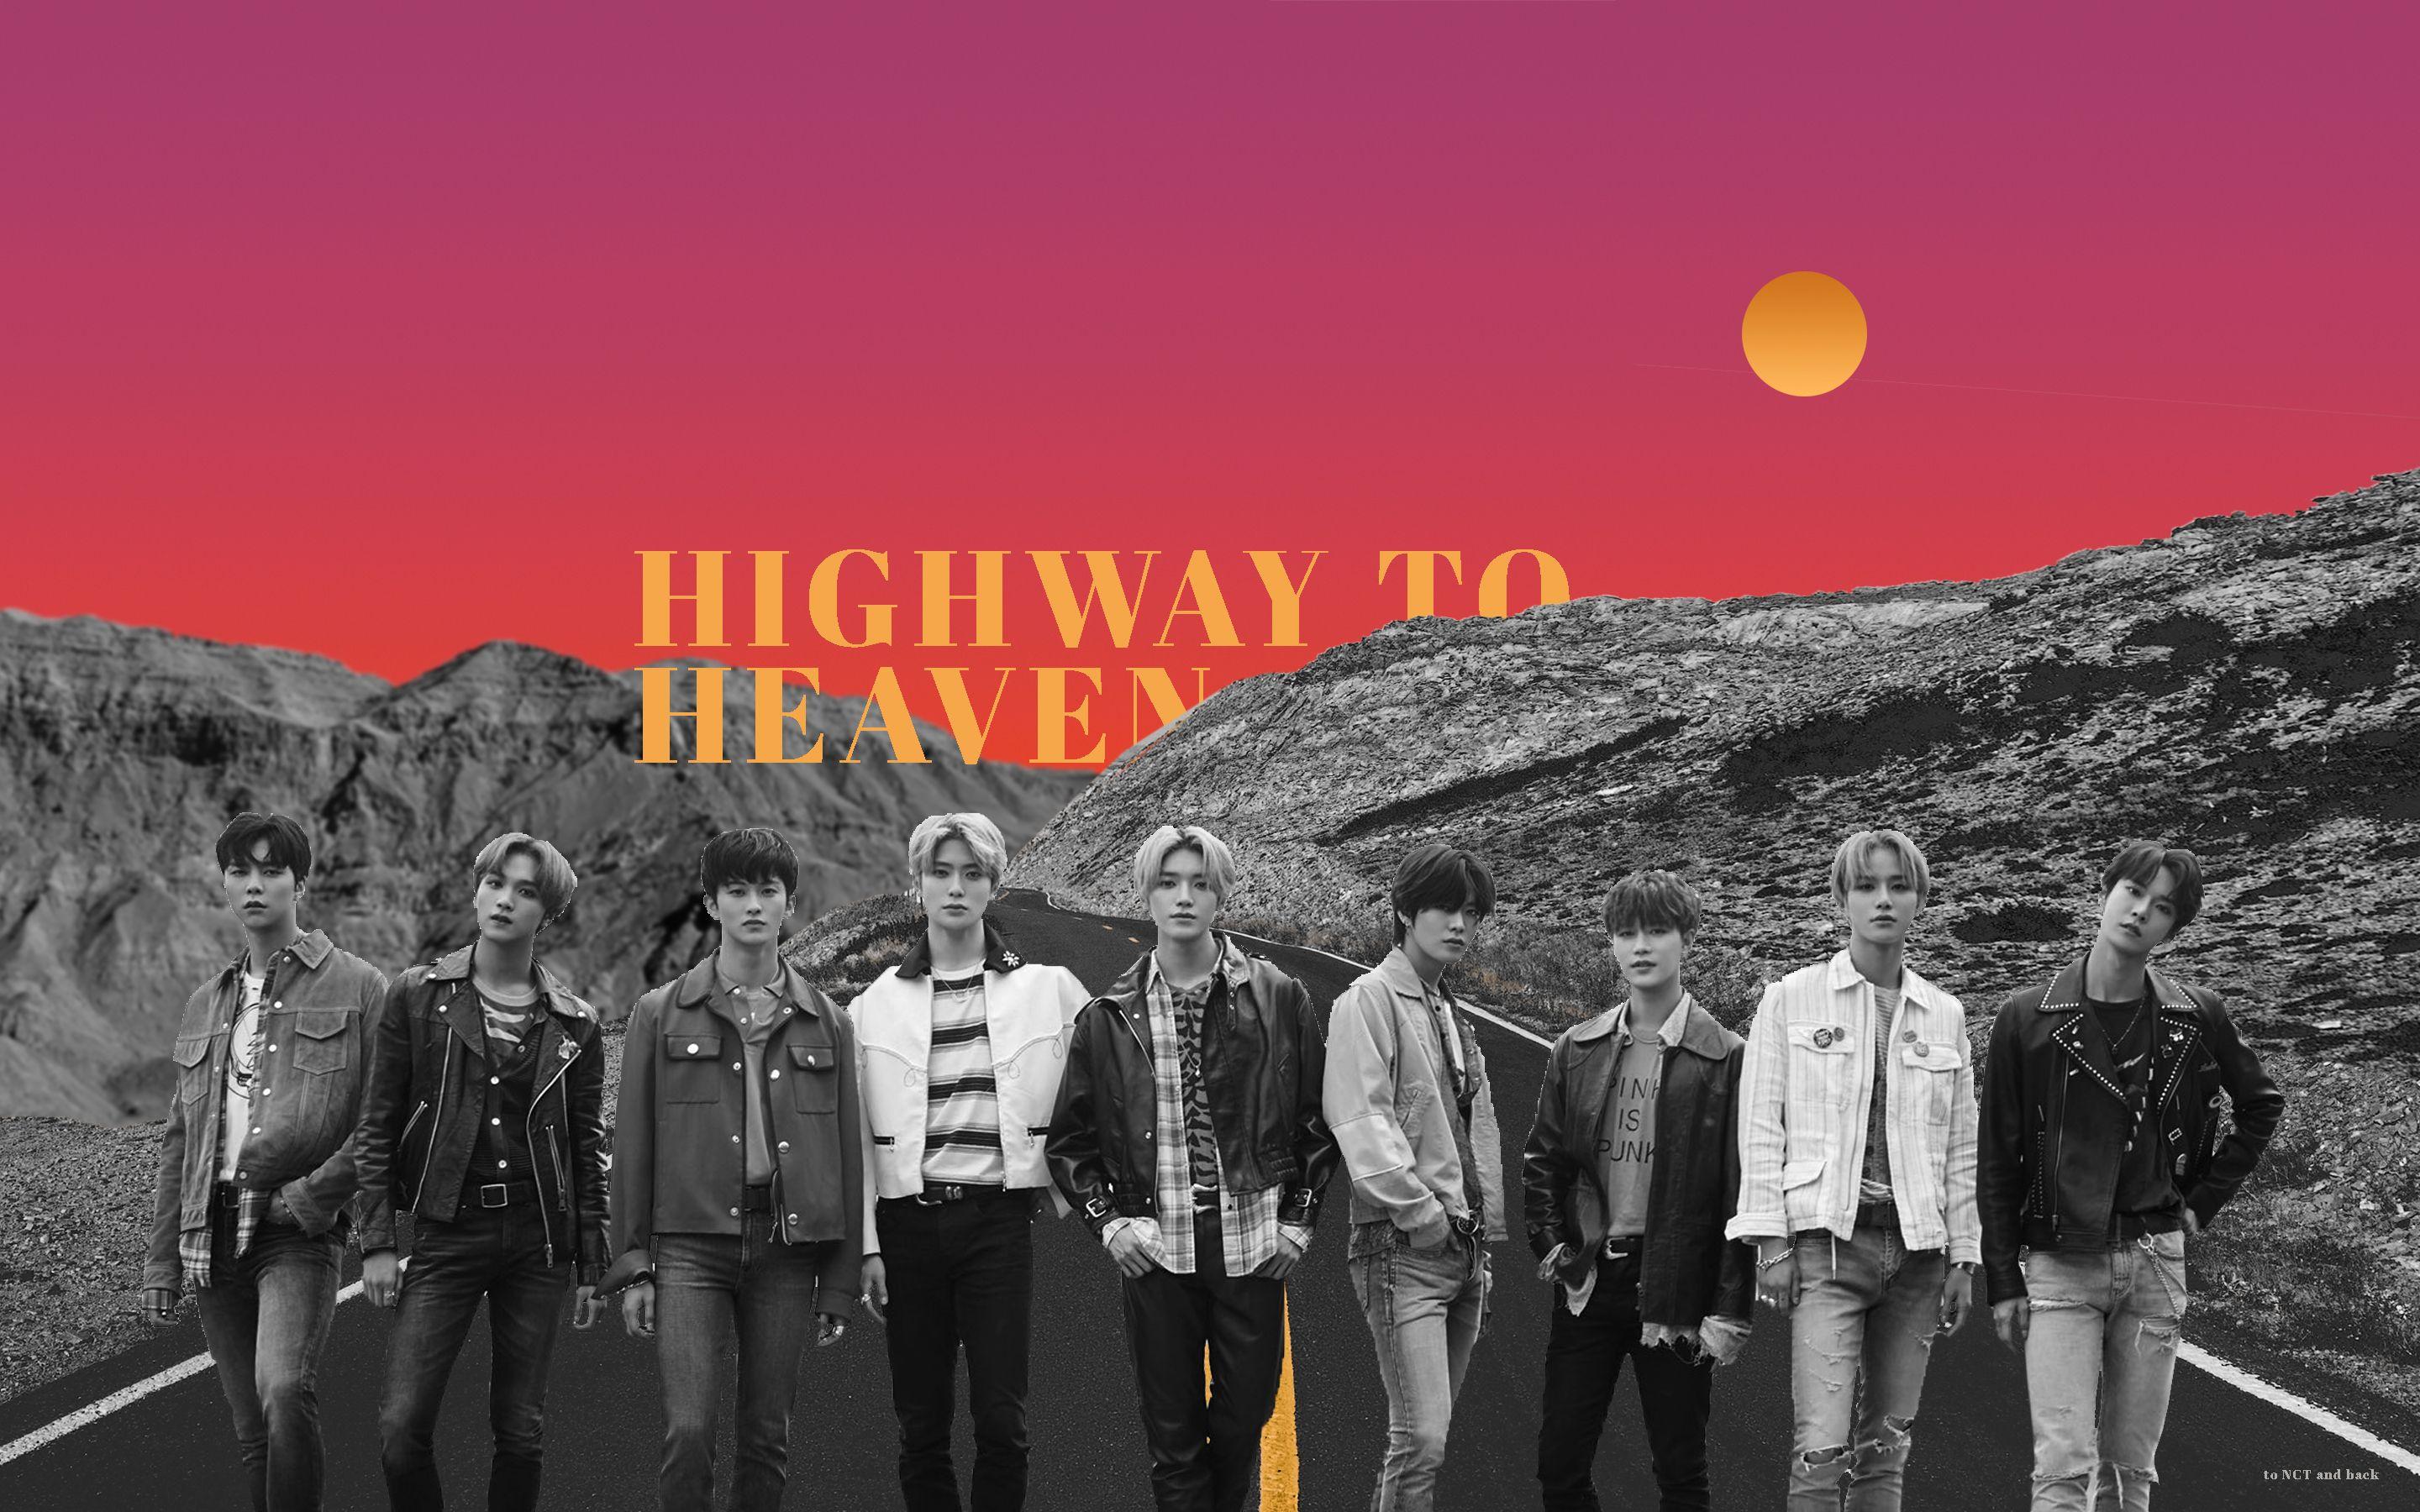 to NCT and back ♡ PL34 on. Nct, Heaven wallpaper